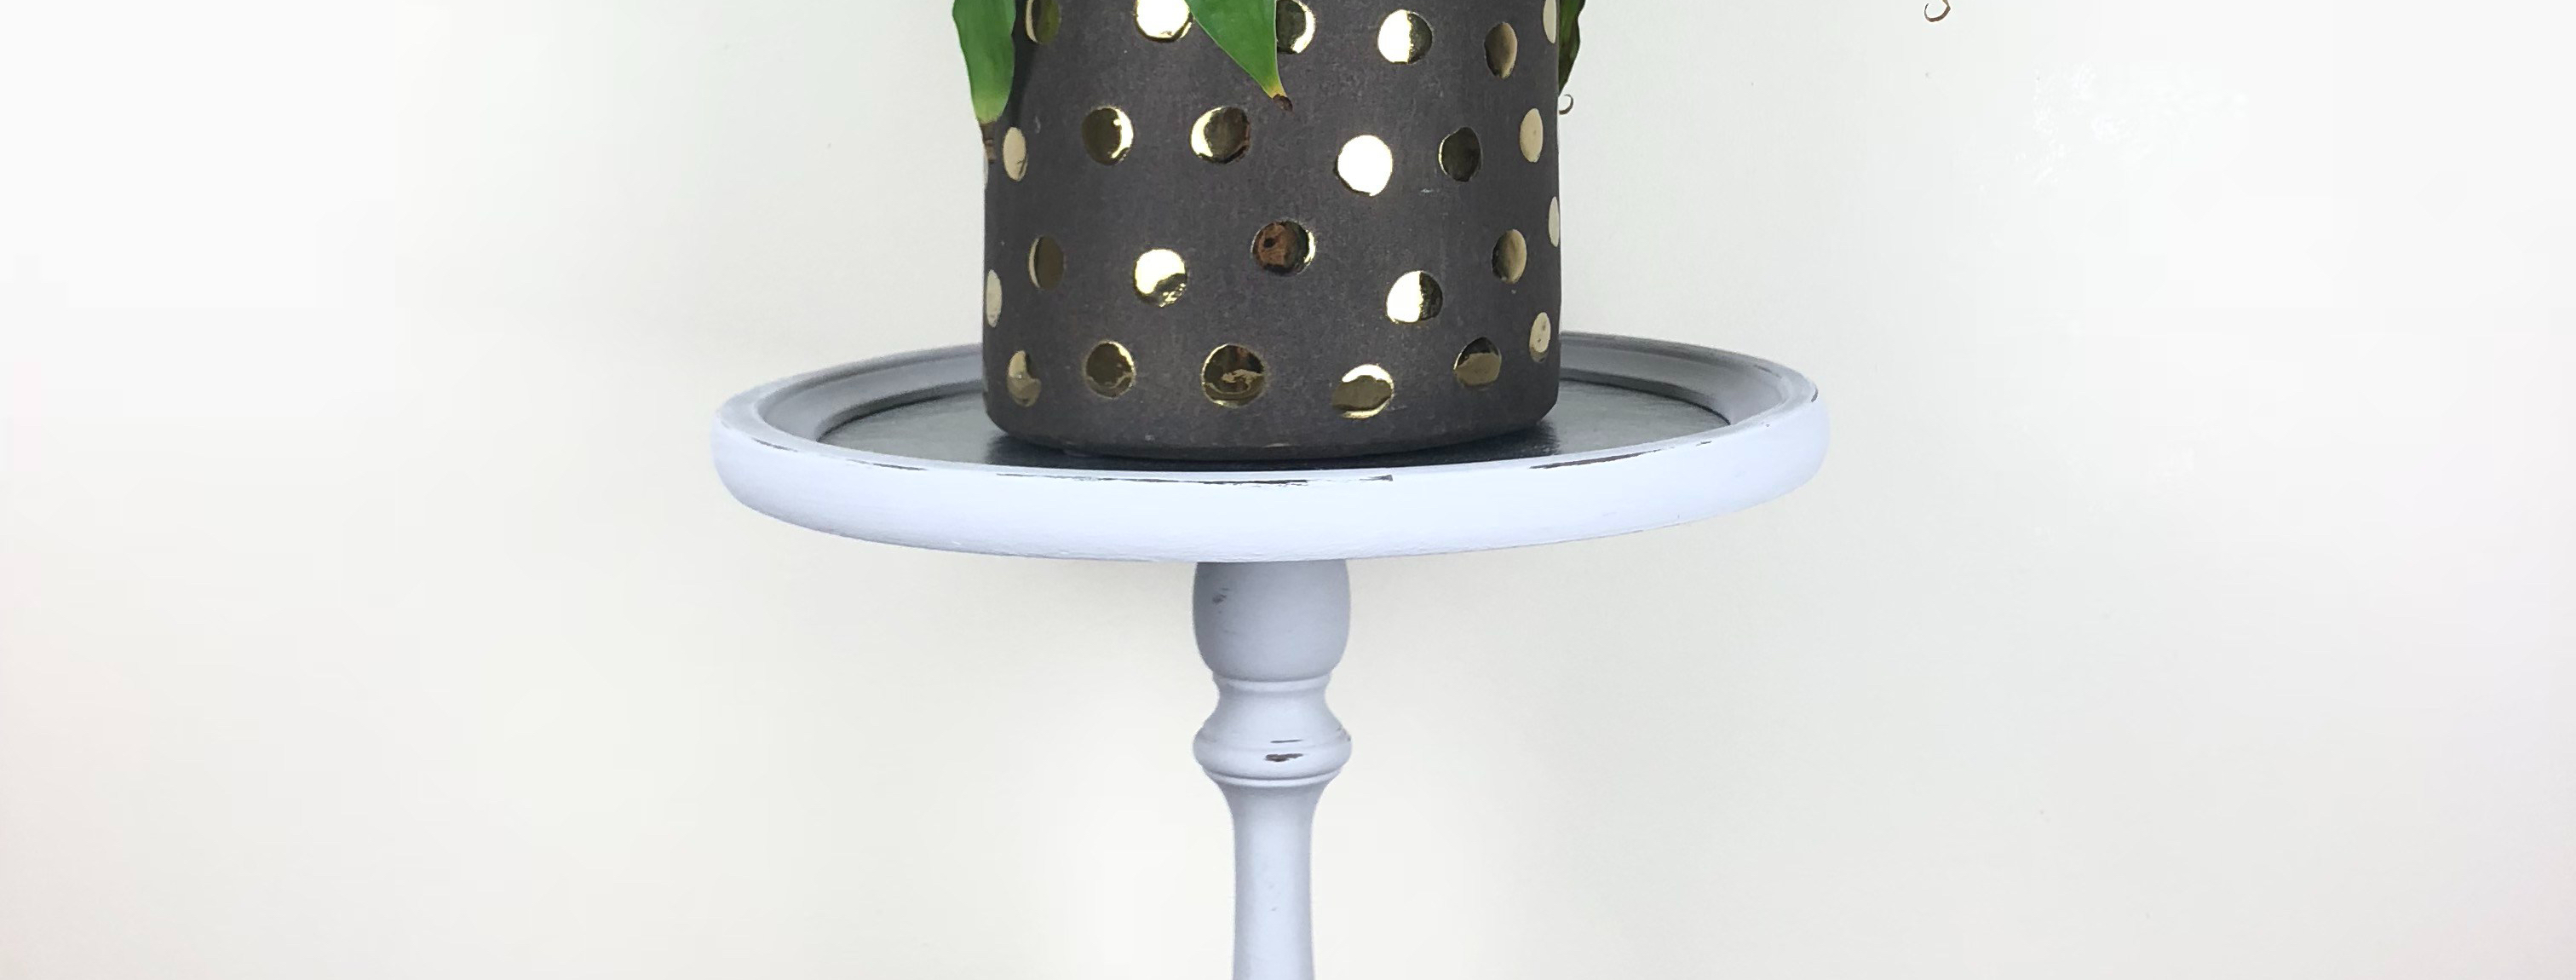 Painted plant stand with dark grey plant pot